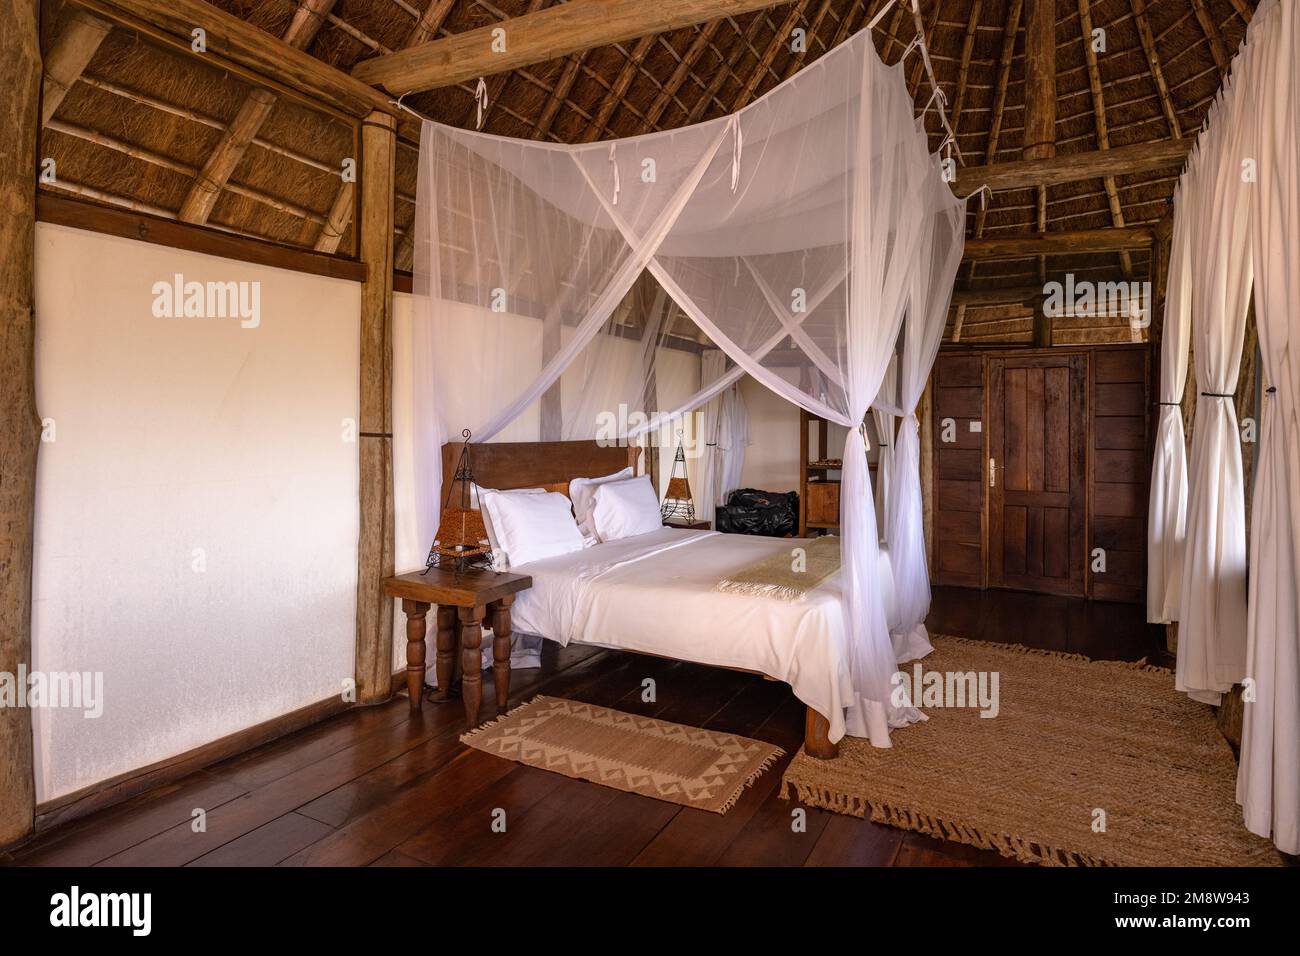 One of the accommodation rooms at the Apoka Safari Lodge in the Kidepo Valley, Uganda.  This room is called Katurum. Stock Photo